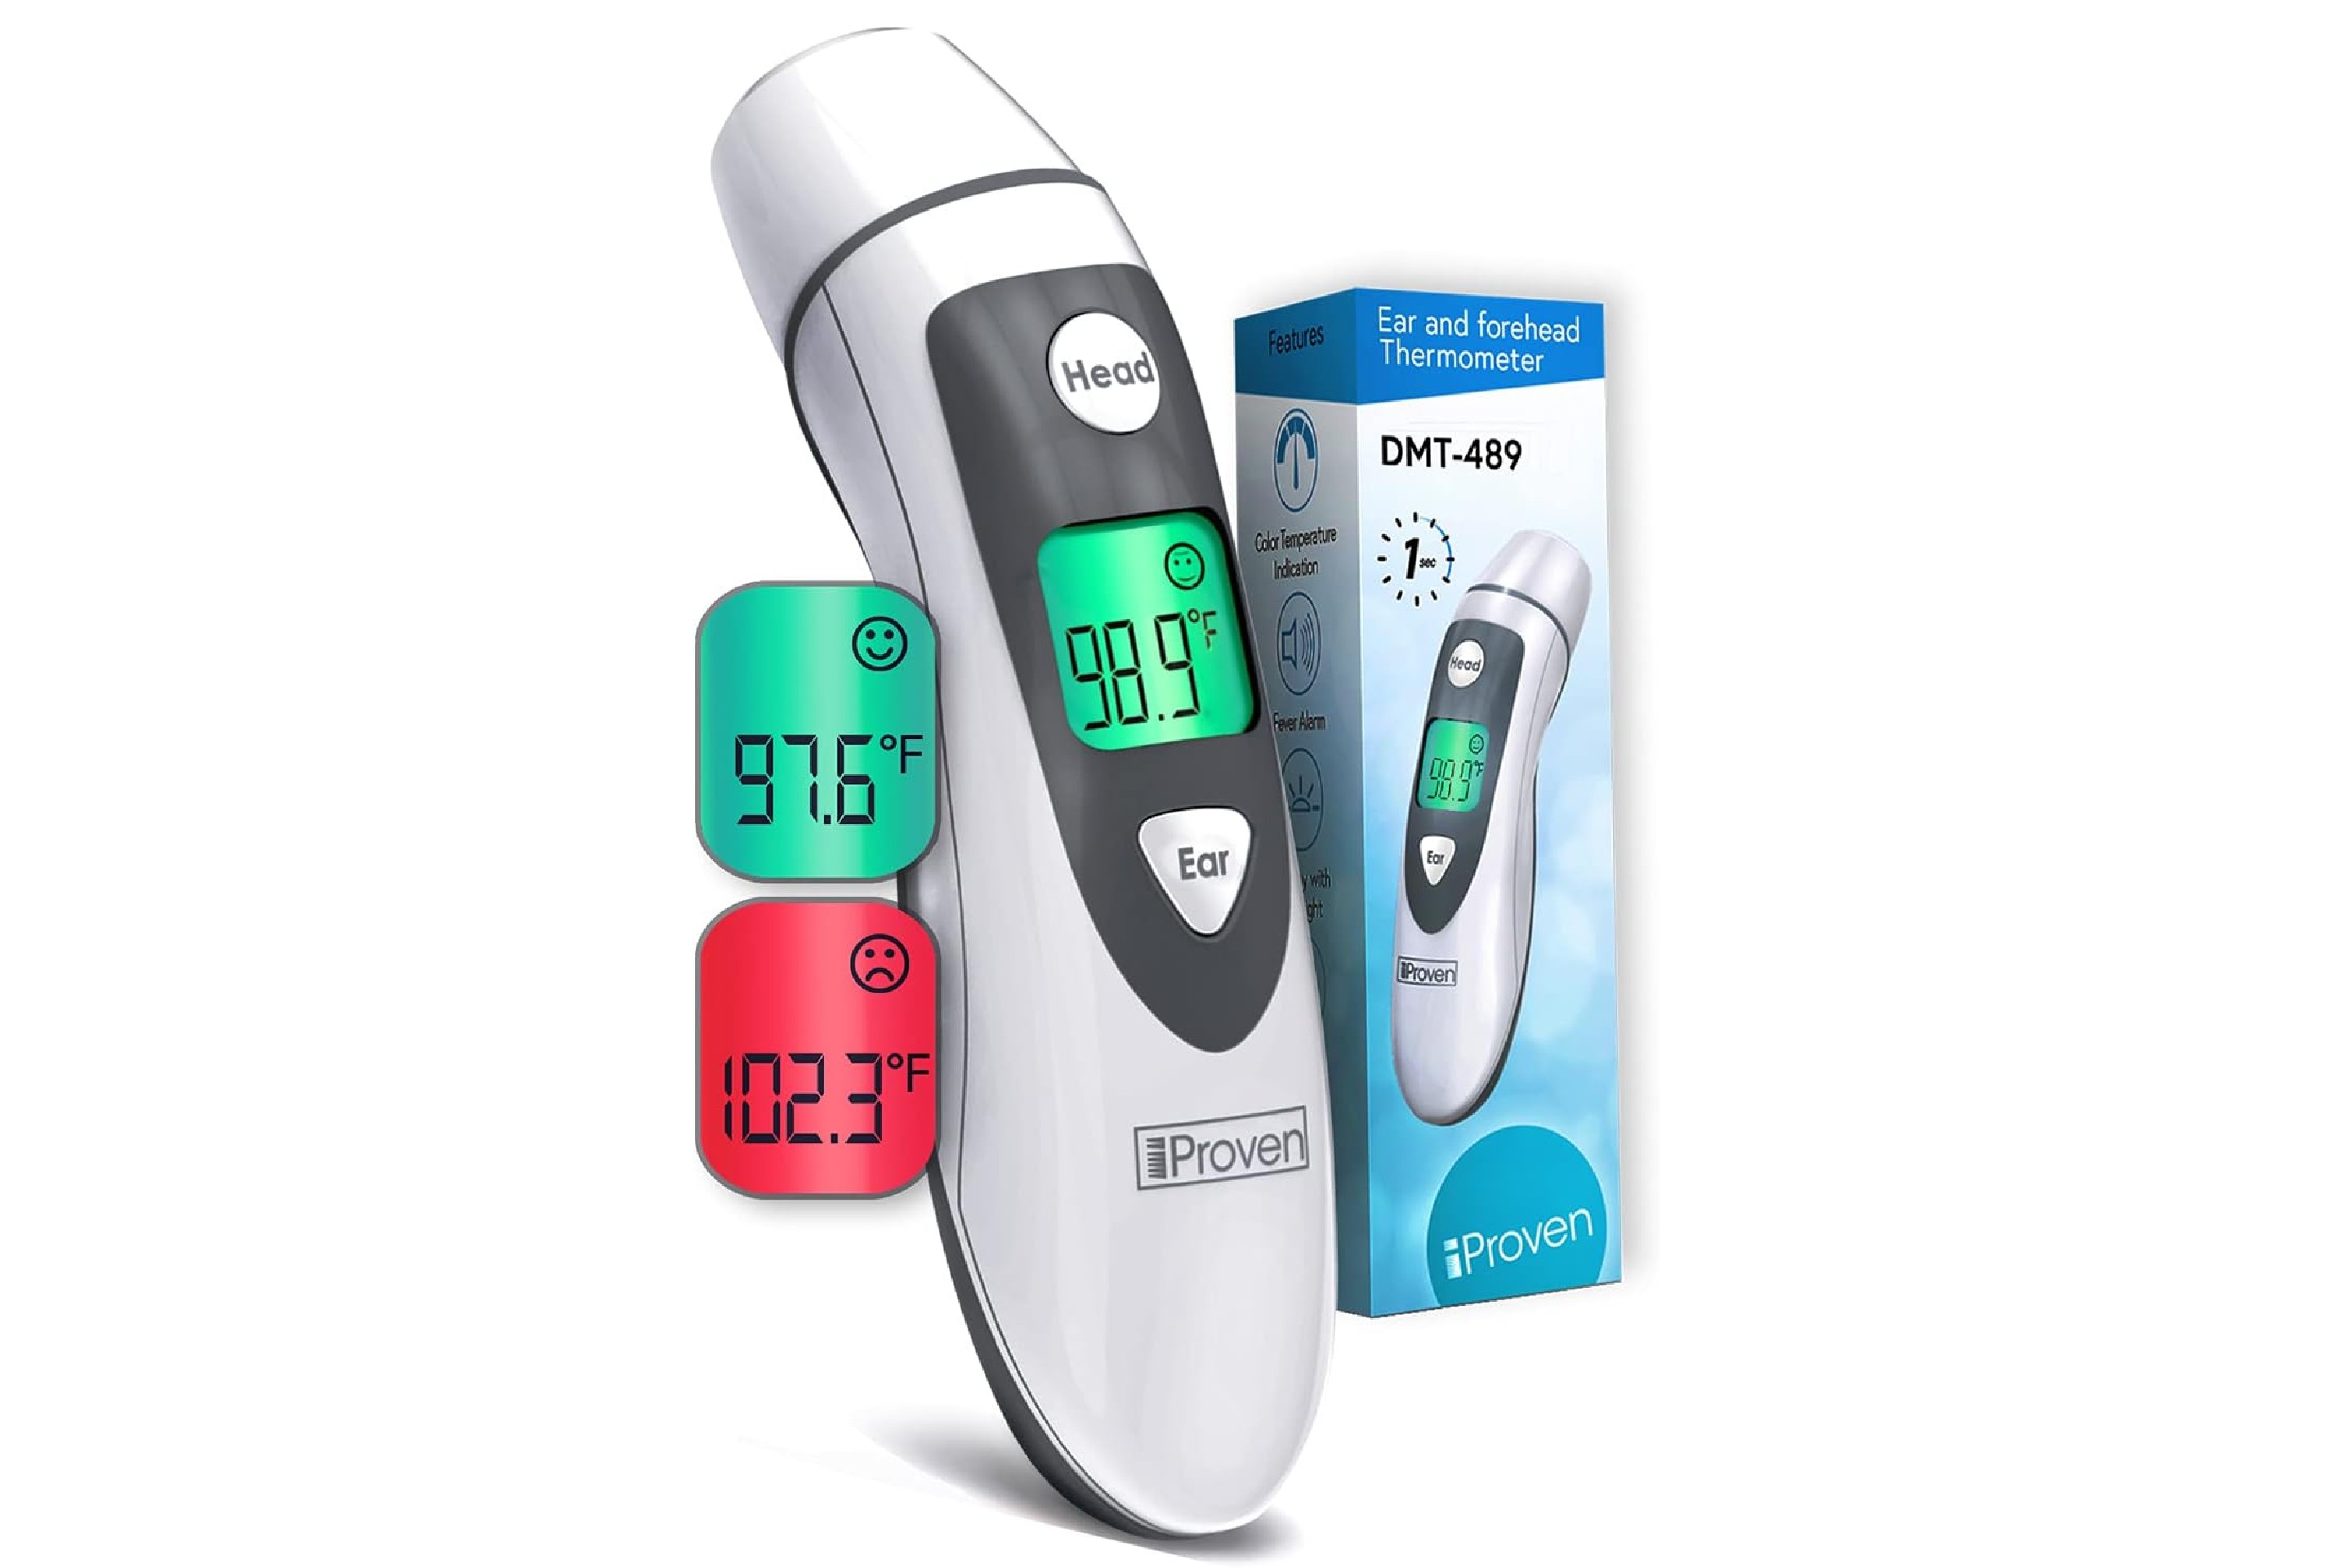 https://img.money.com/2023/09/shopping-iproven-dmt-489-forehead-thermometer.jpg